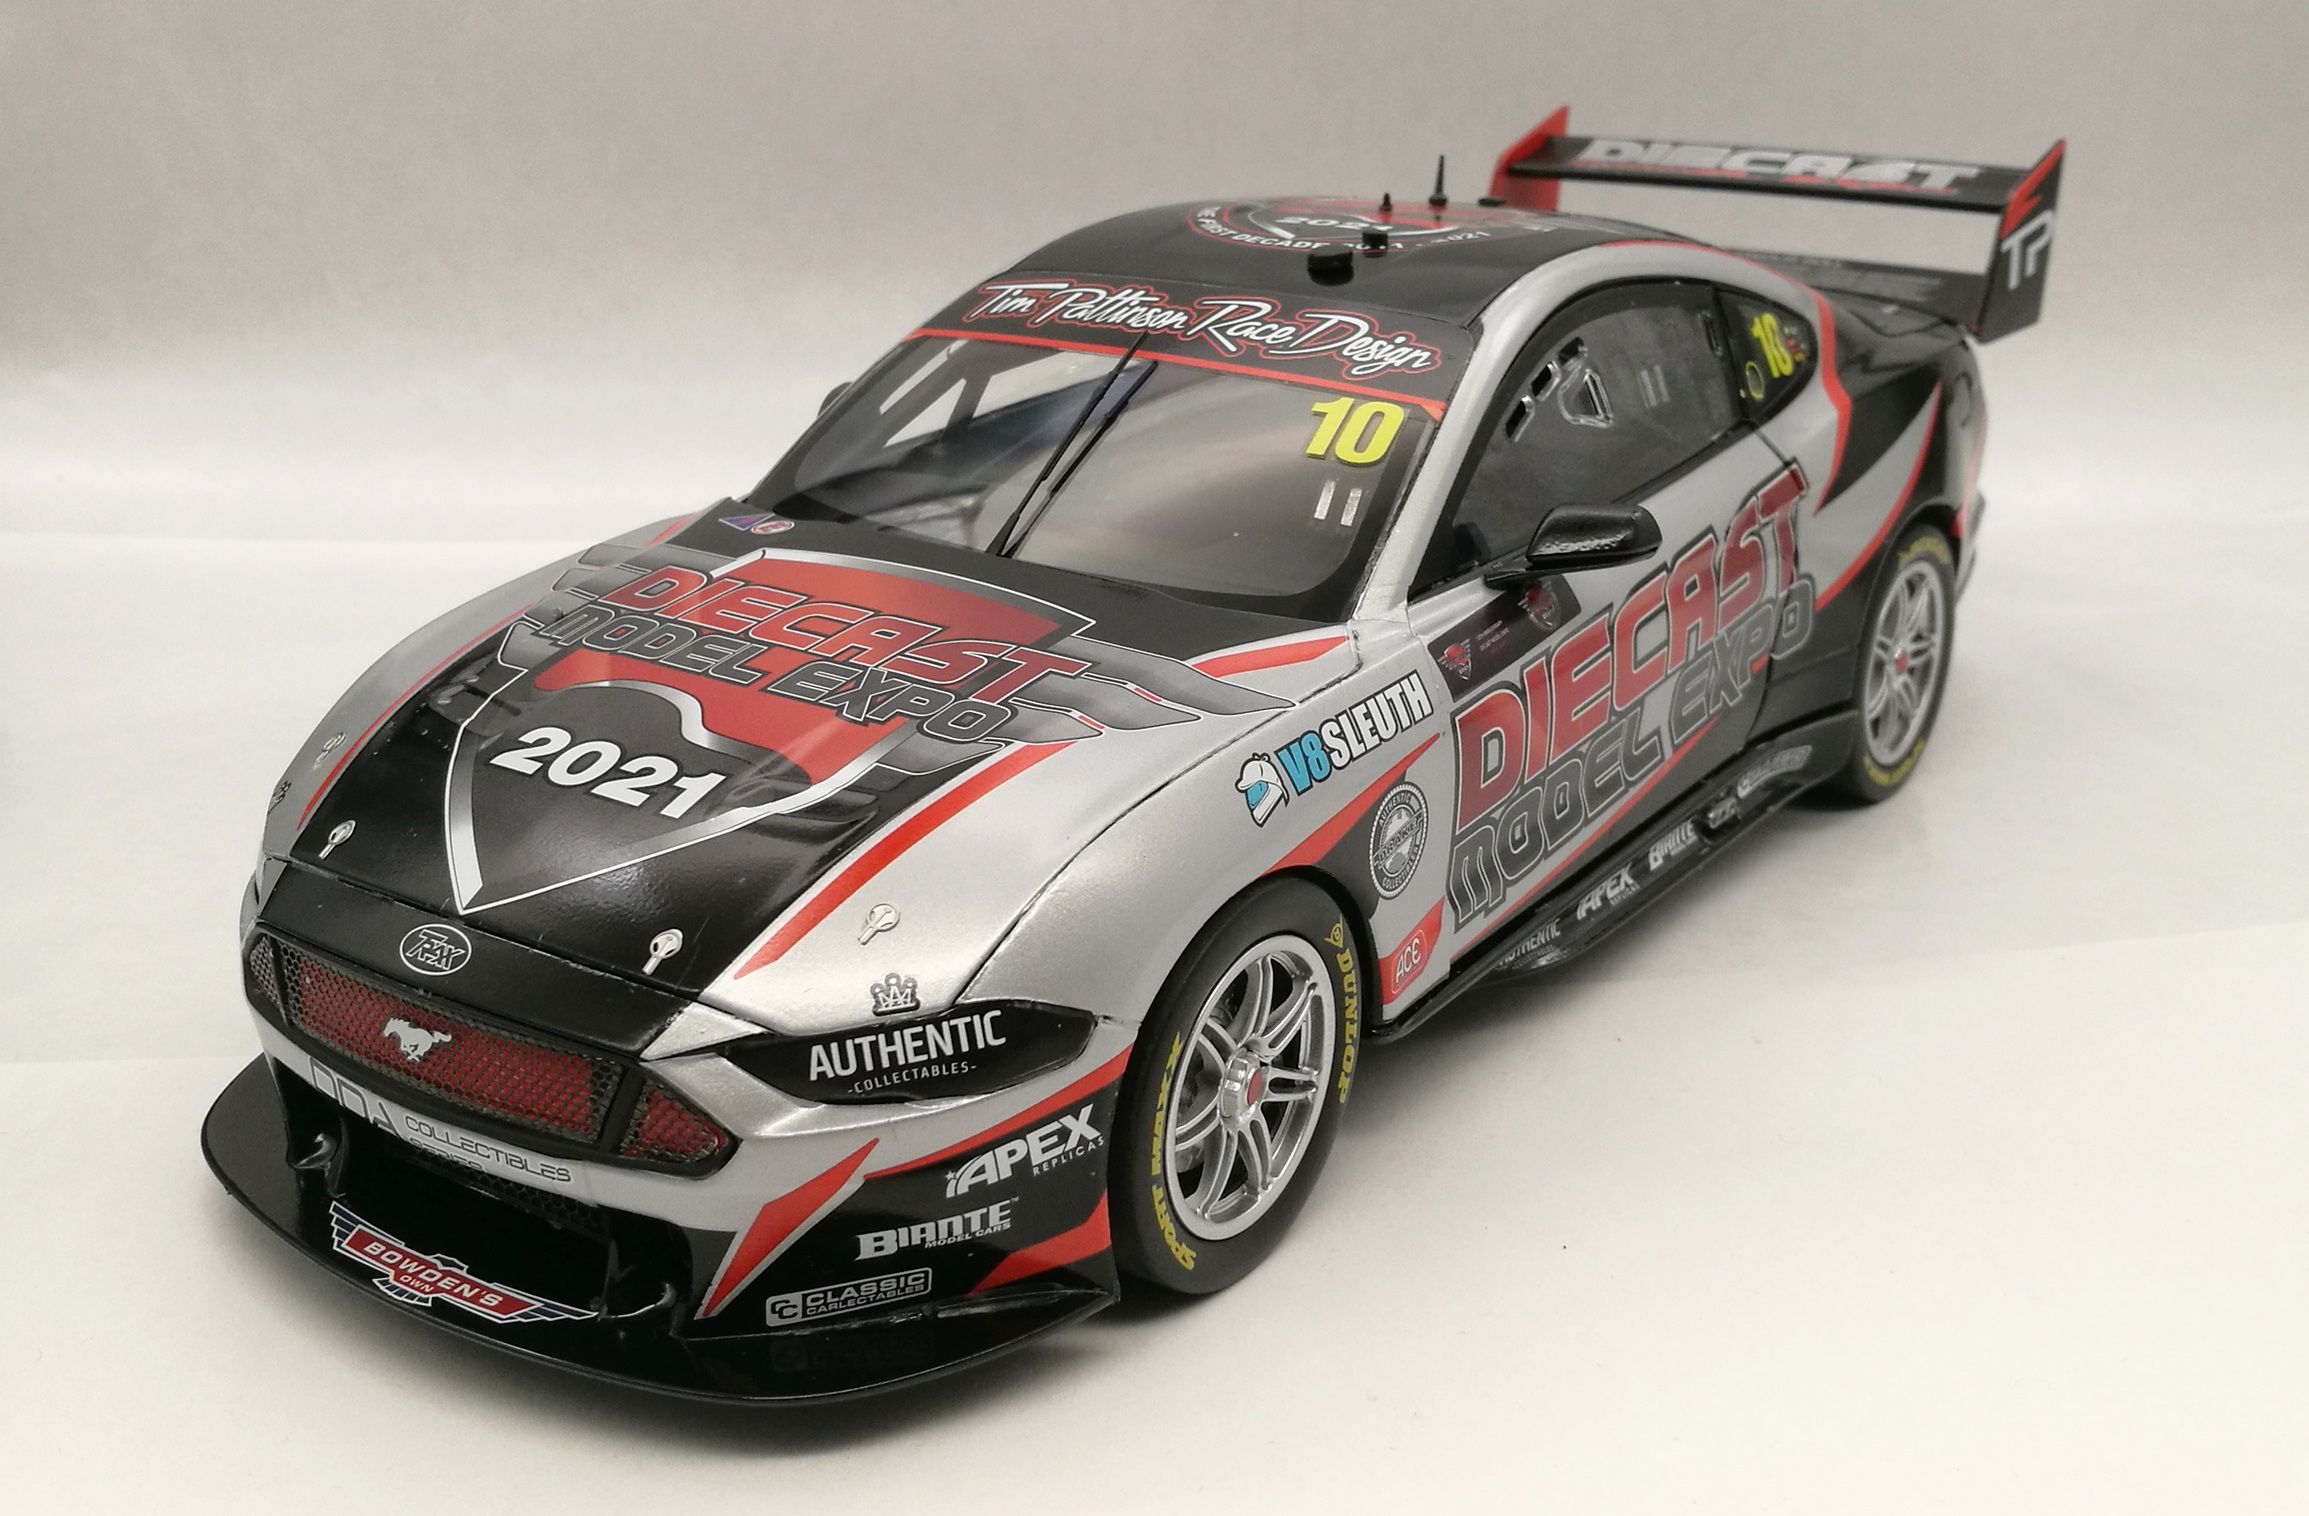 Ford Mustang GT Supercar, Diecast model expo racing team